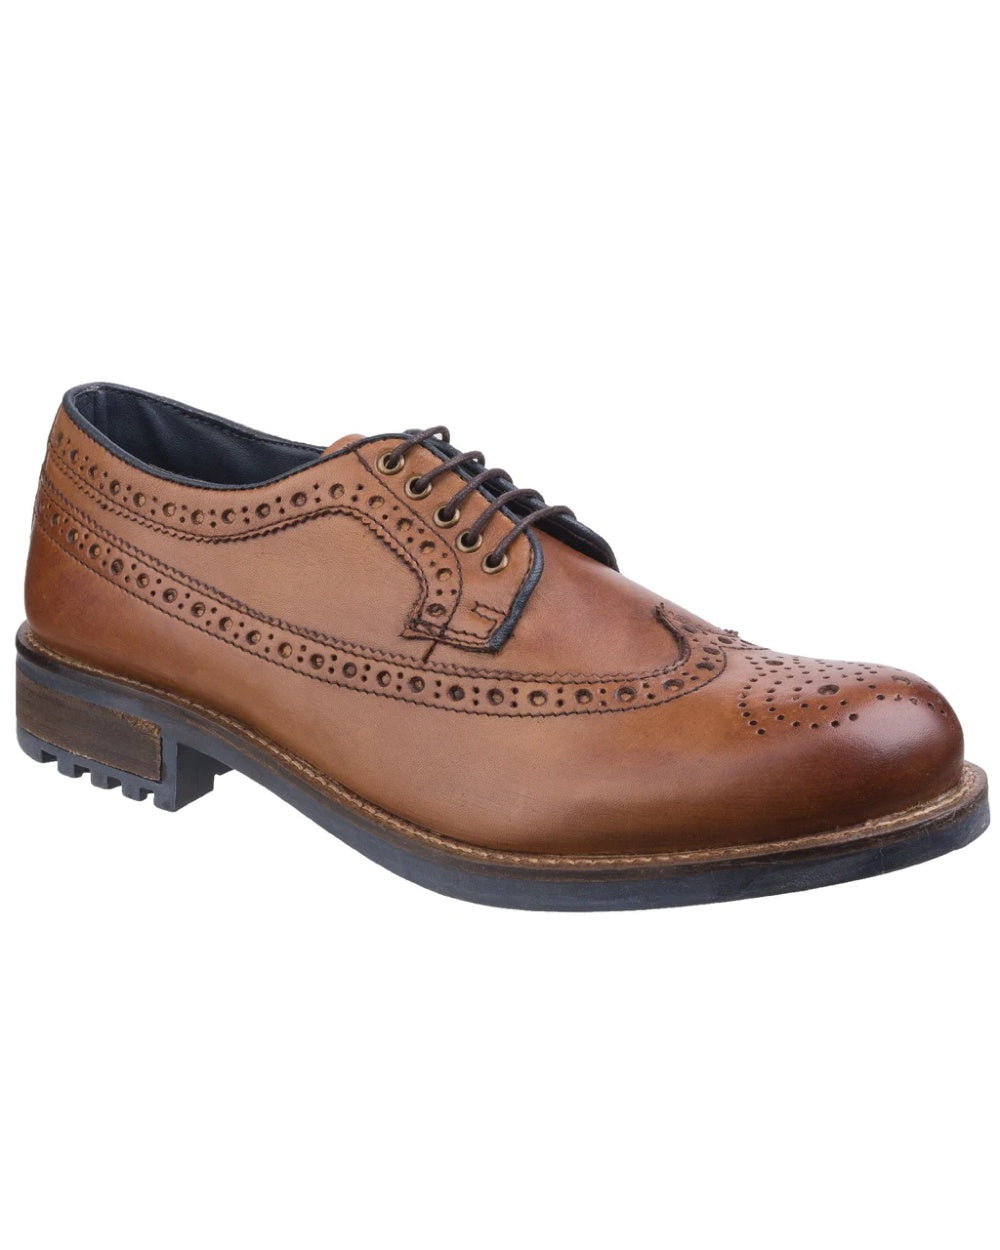 Tan coloured Cotswold Poplar Brogue Dress Shoes on white background 